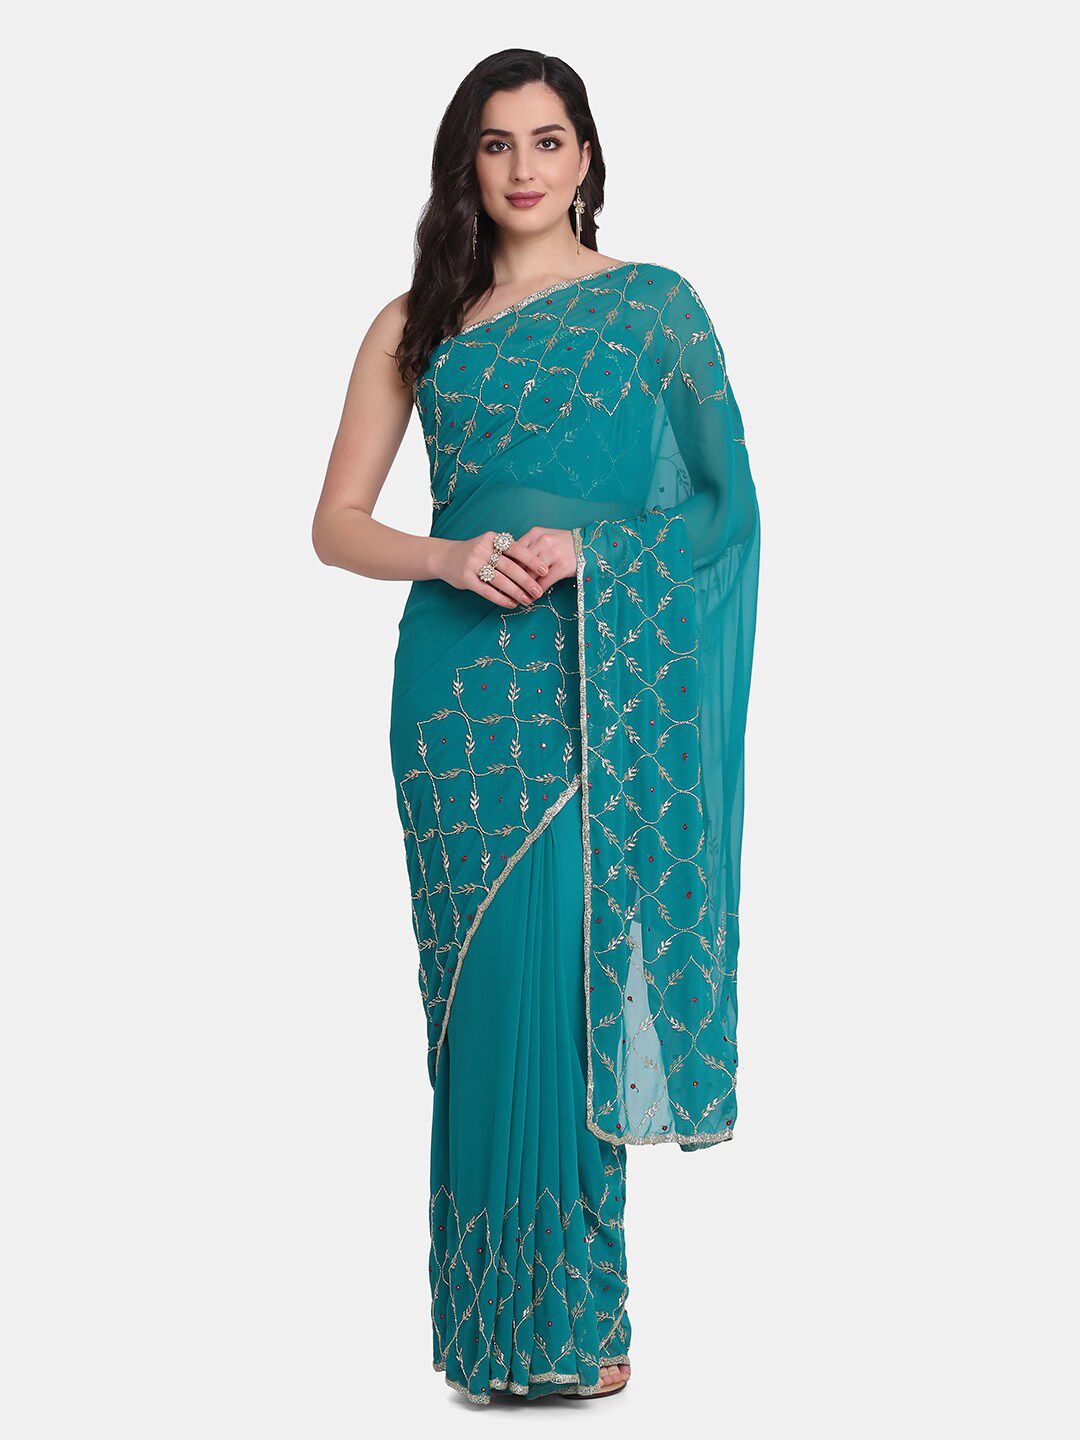 BOMBAY SELECTIONS Teal Ethnic Motifs Beads and Stones Pure Georgette Saree Price in India